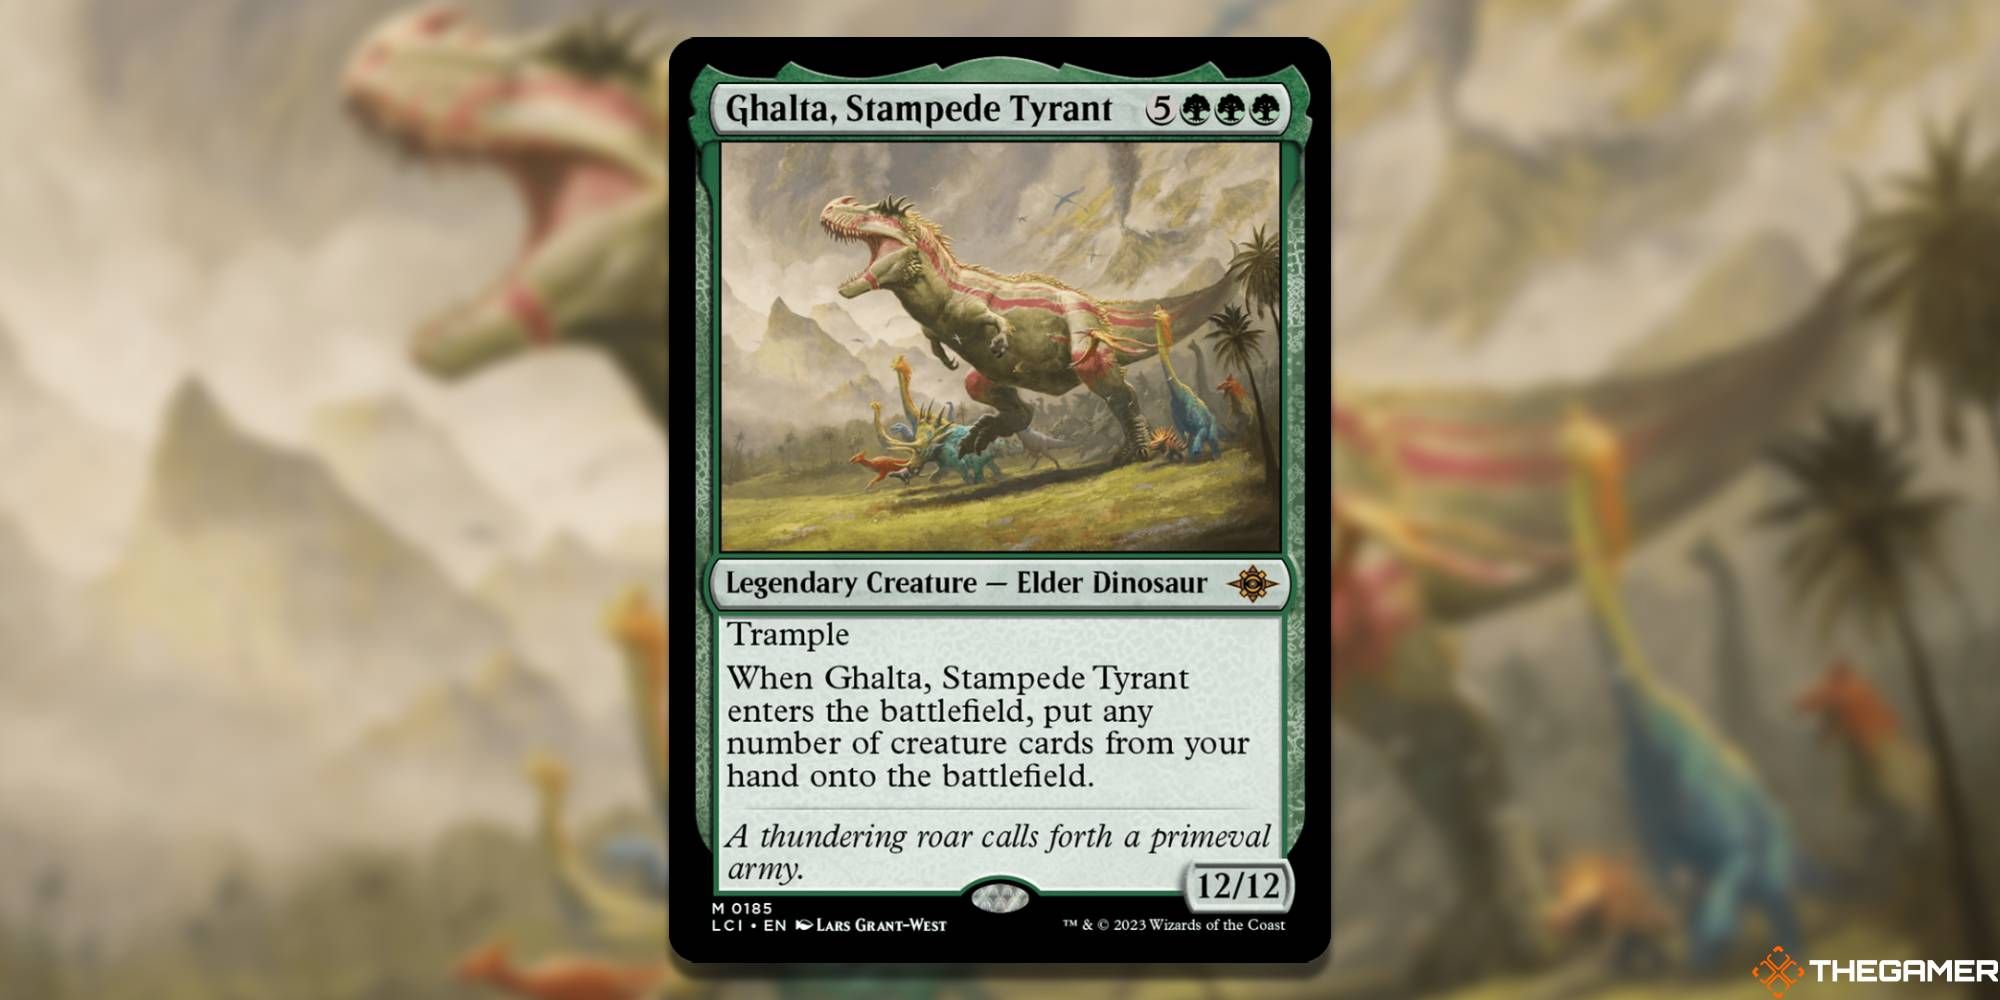 MTG Ghalta, Stampede Tyrant card and art background